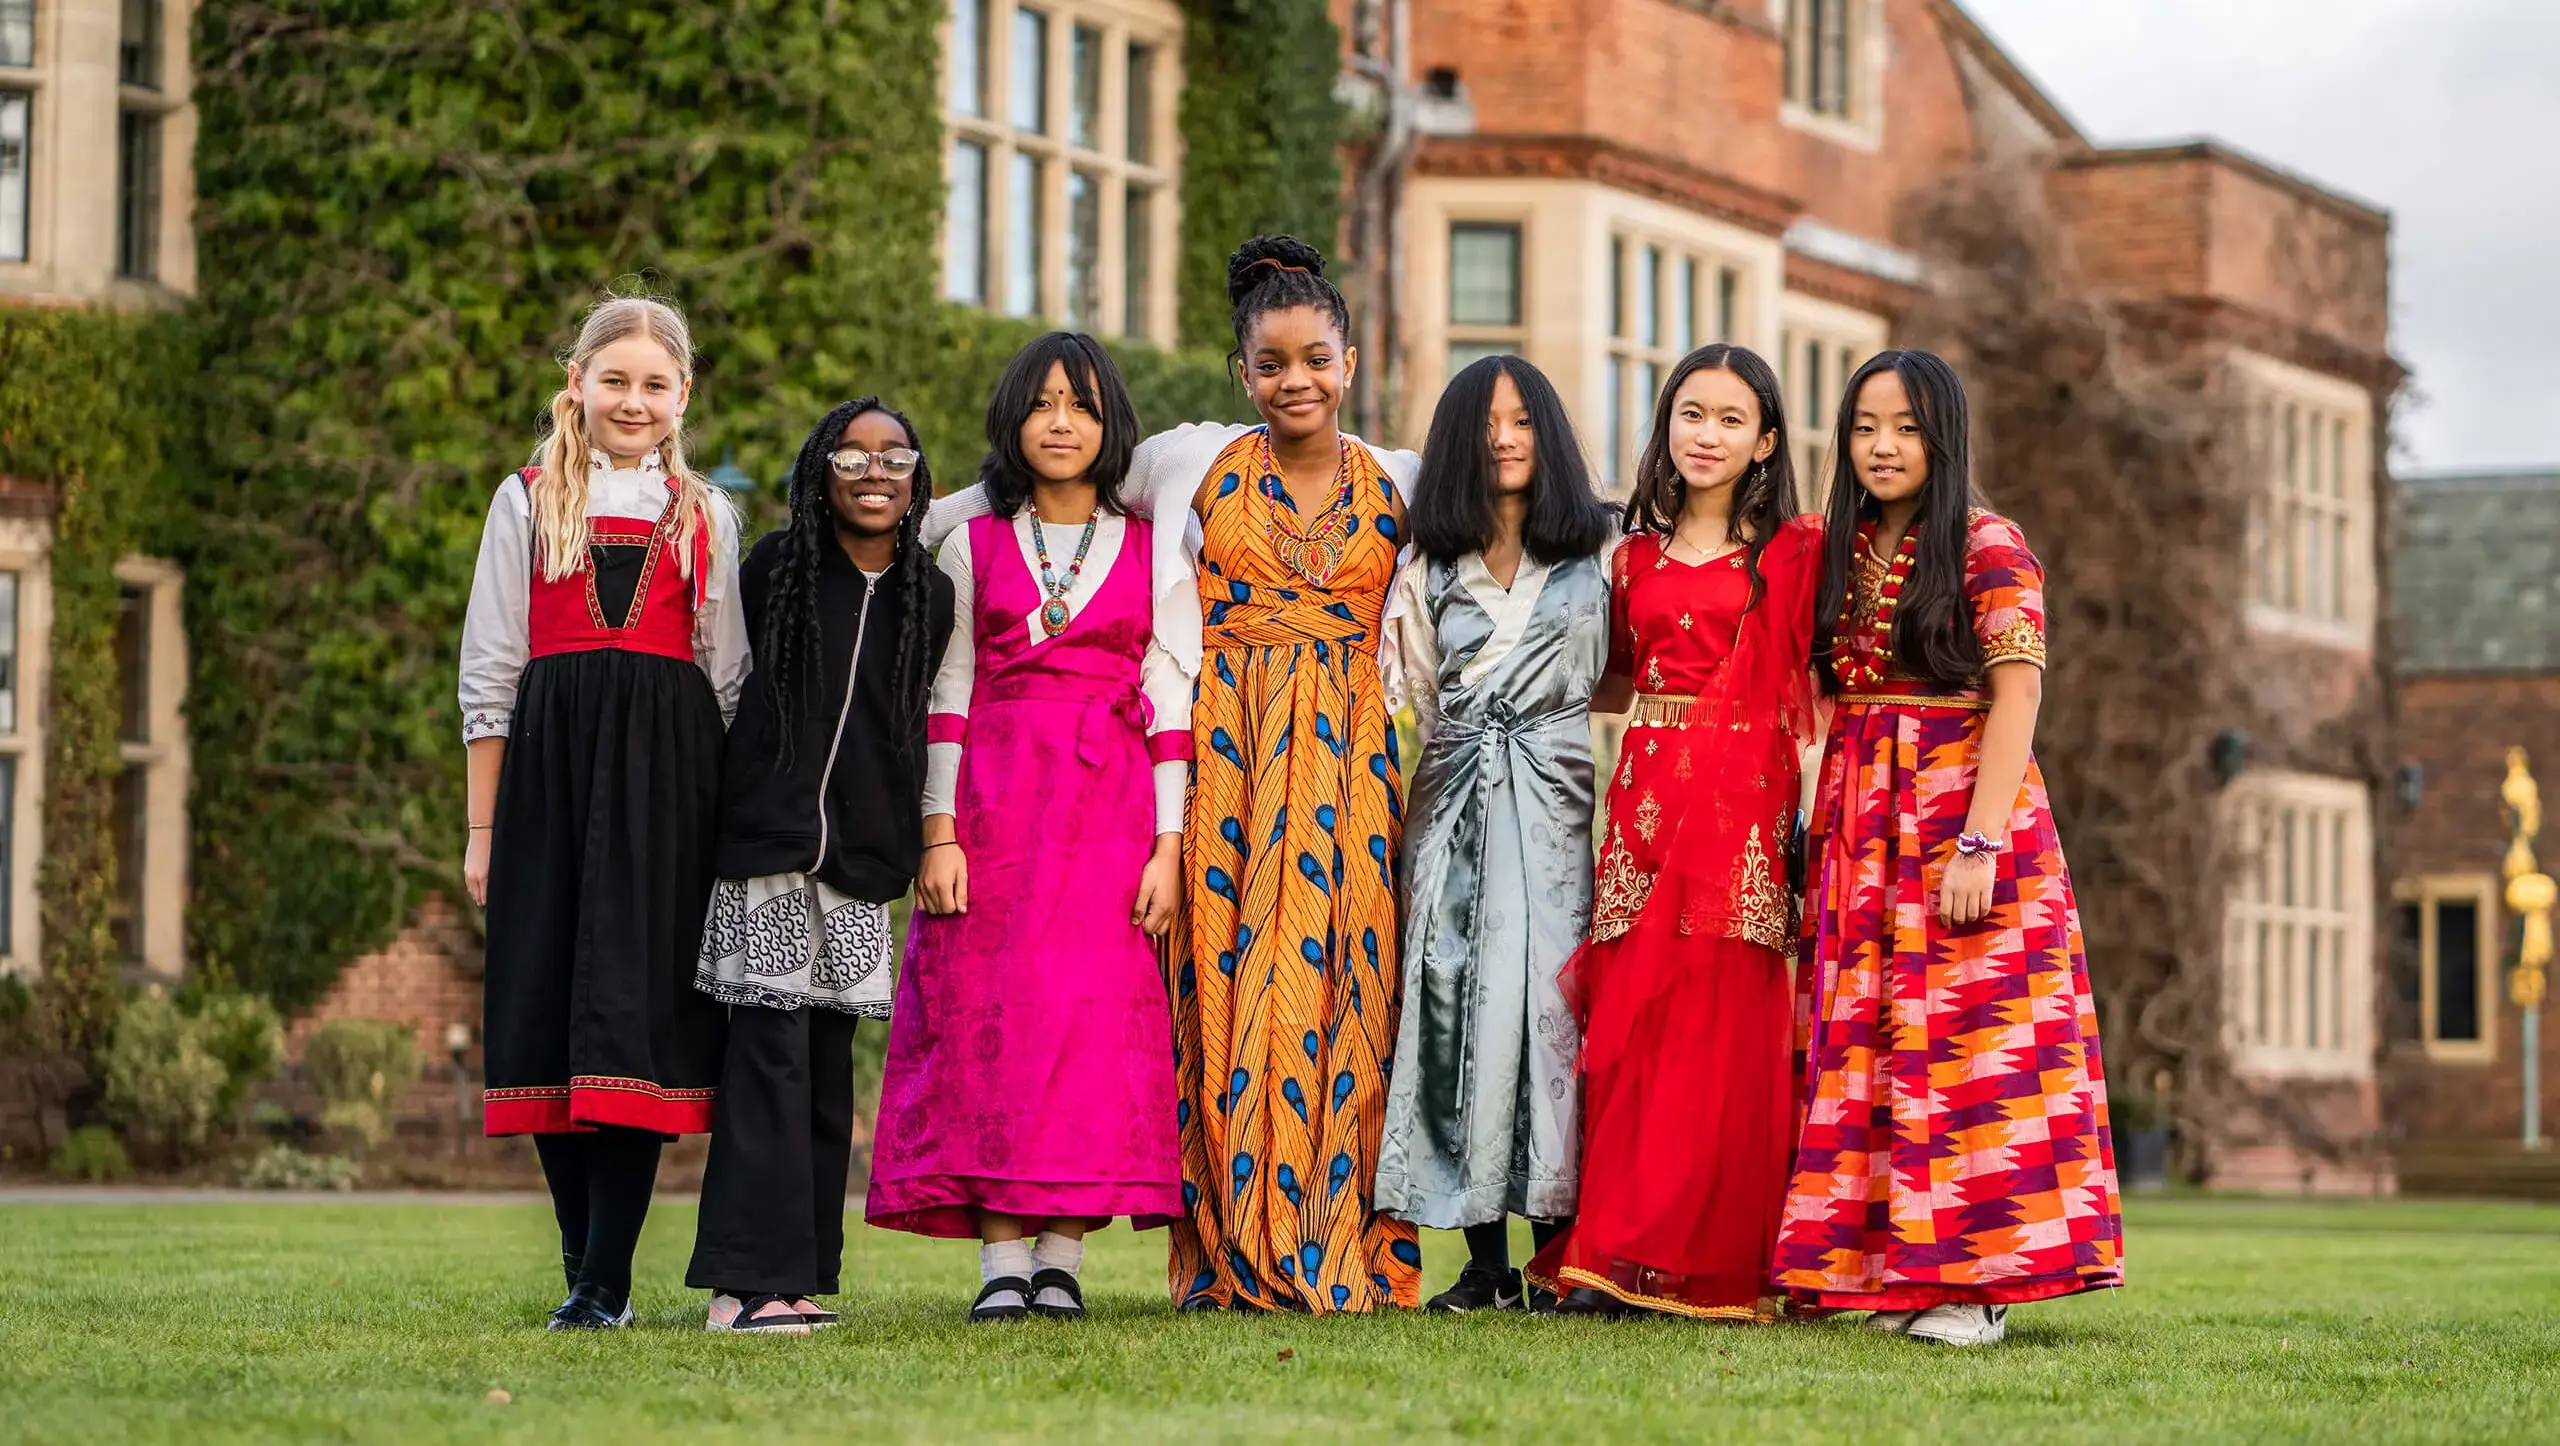 King's Magna pupils wearing traditional national dress from around the world